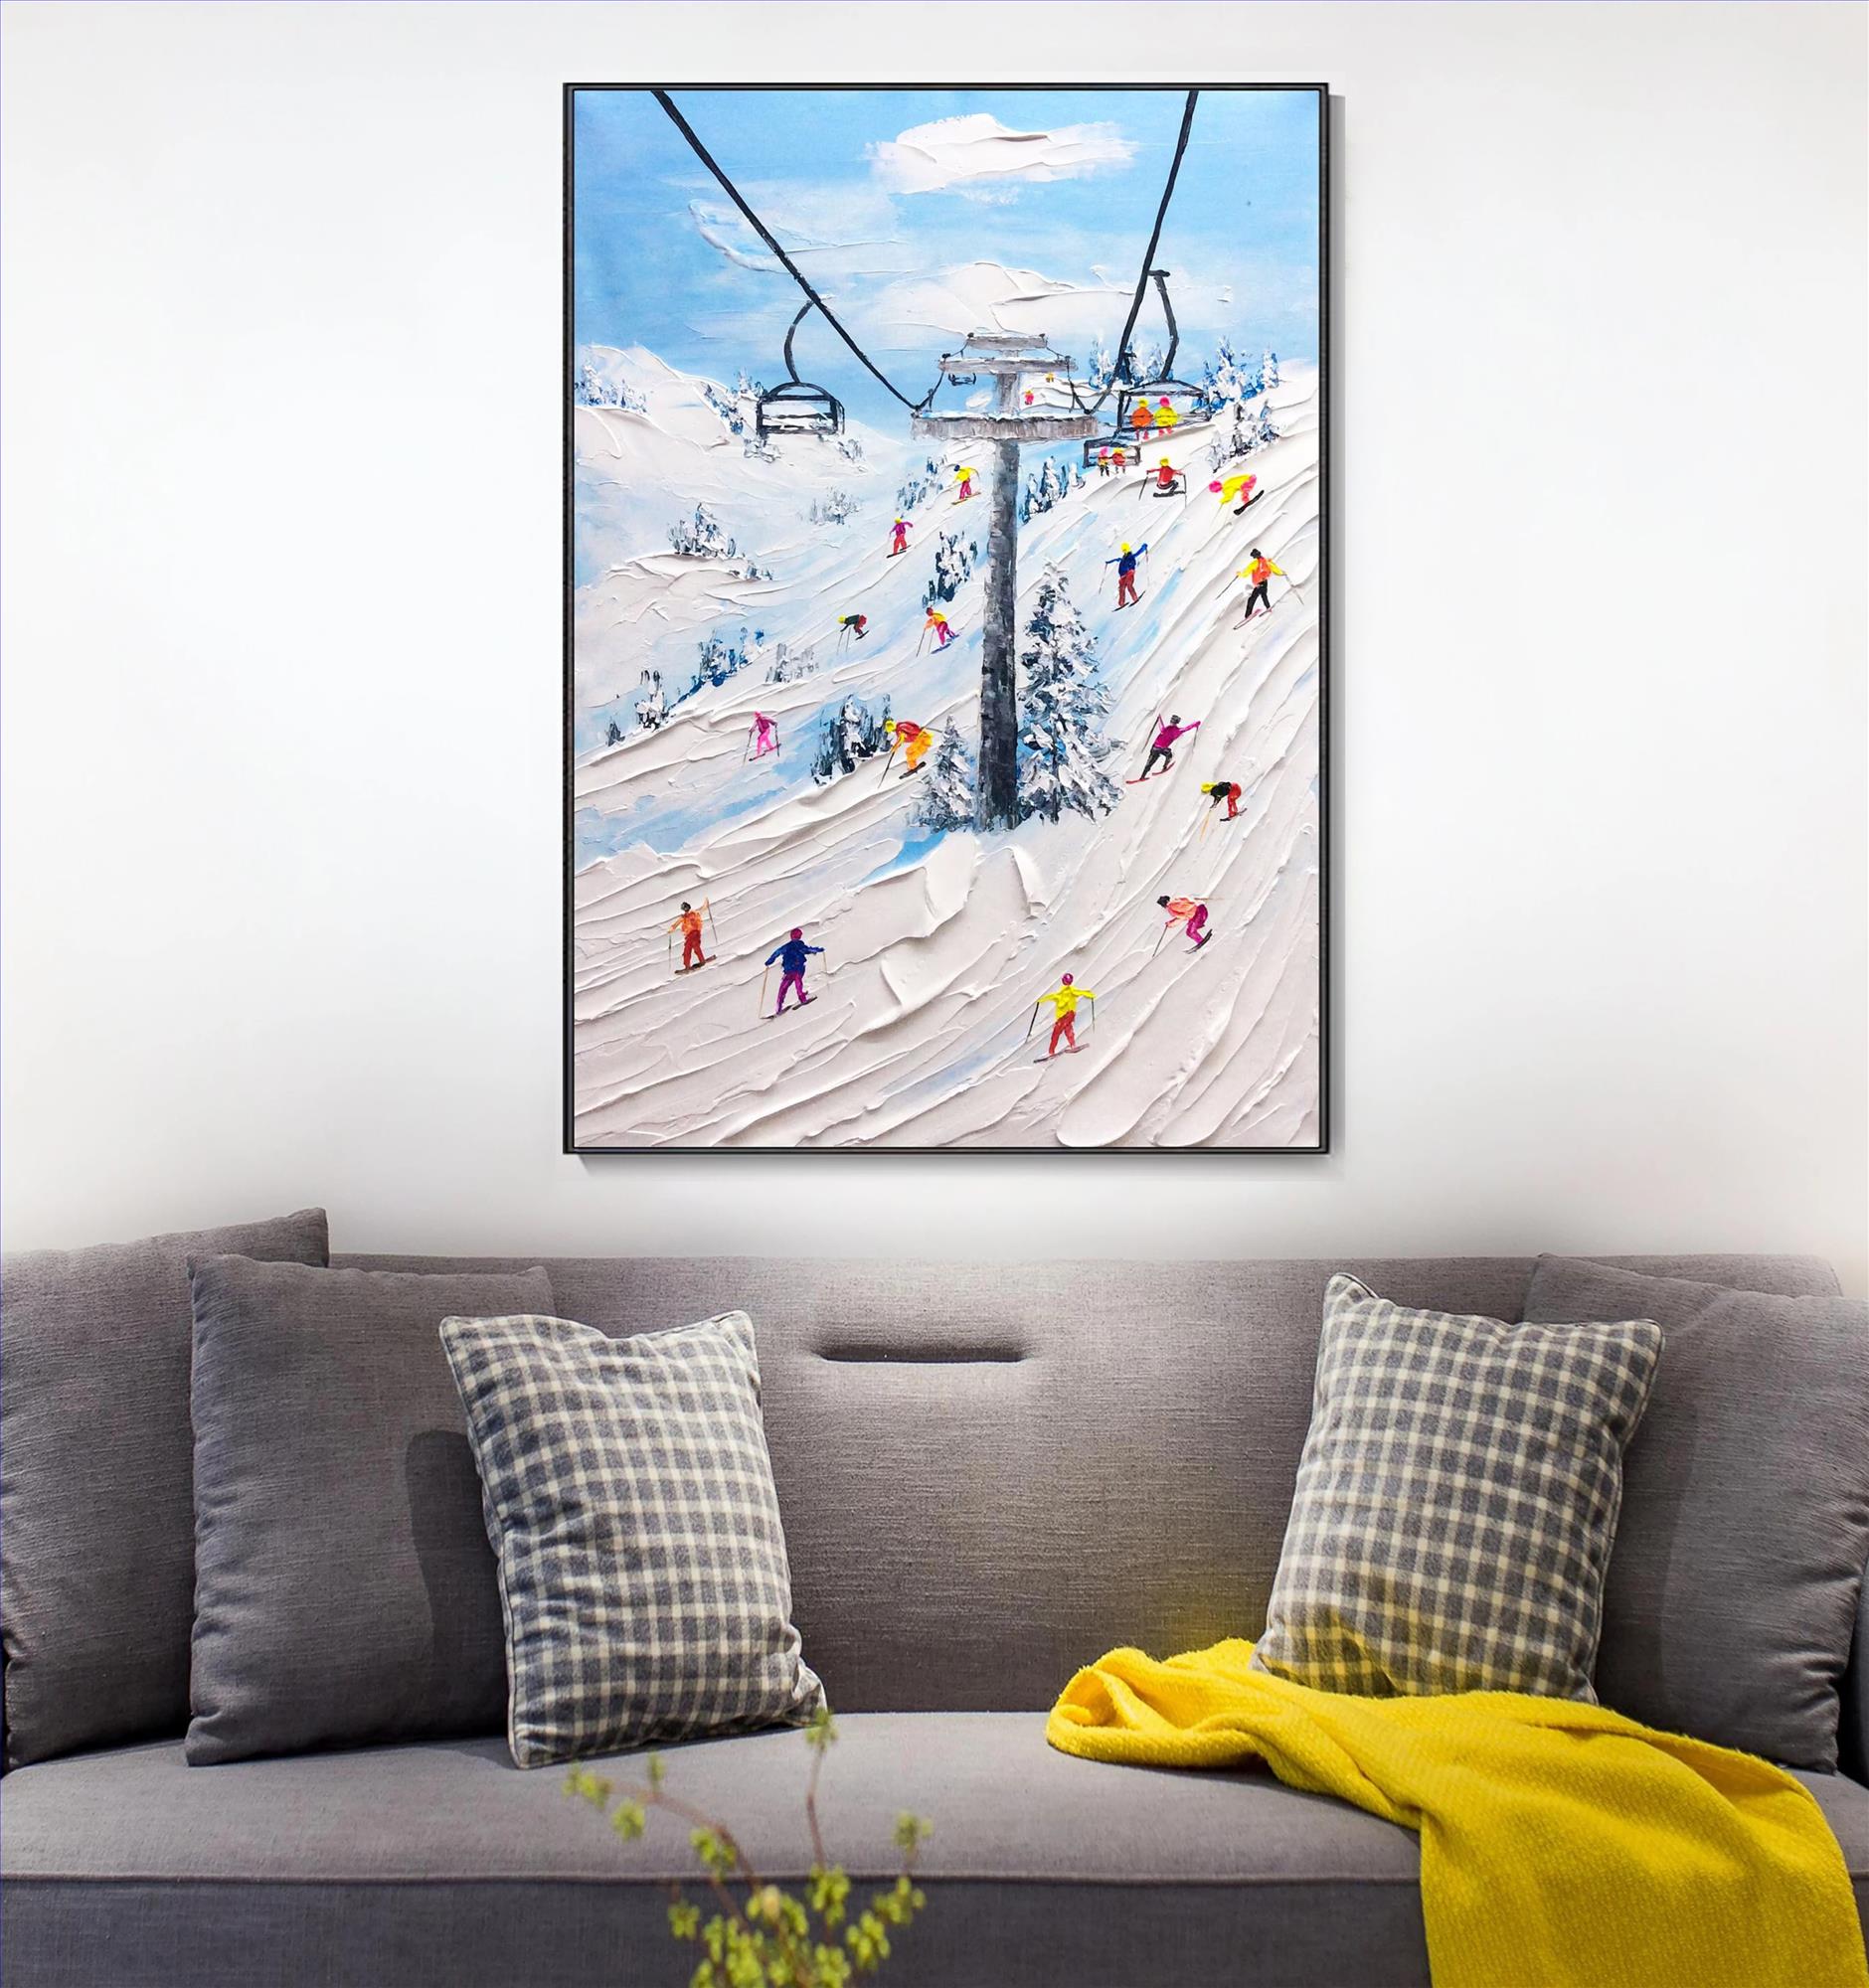 Skier on Snowy Mountain Wall Art Sport White Snow Skiing Room Decor by Knife 20 Oil Paintings